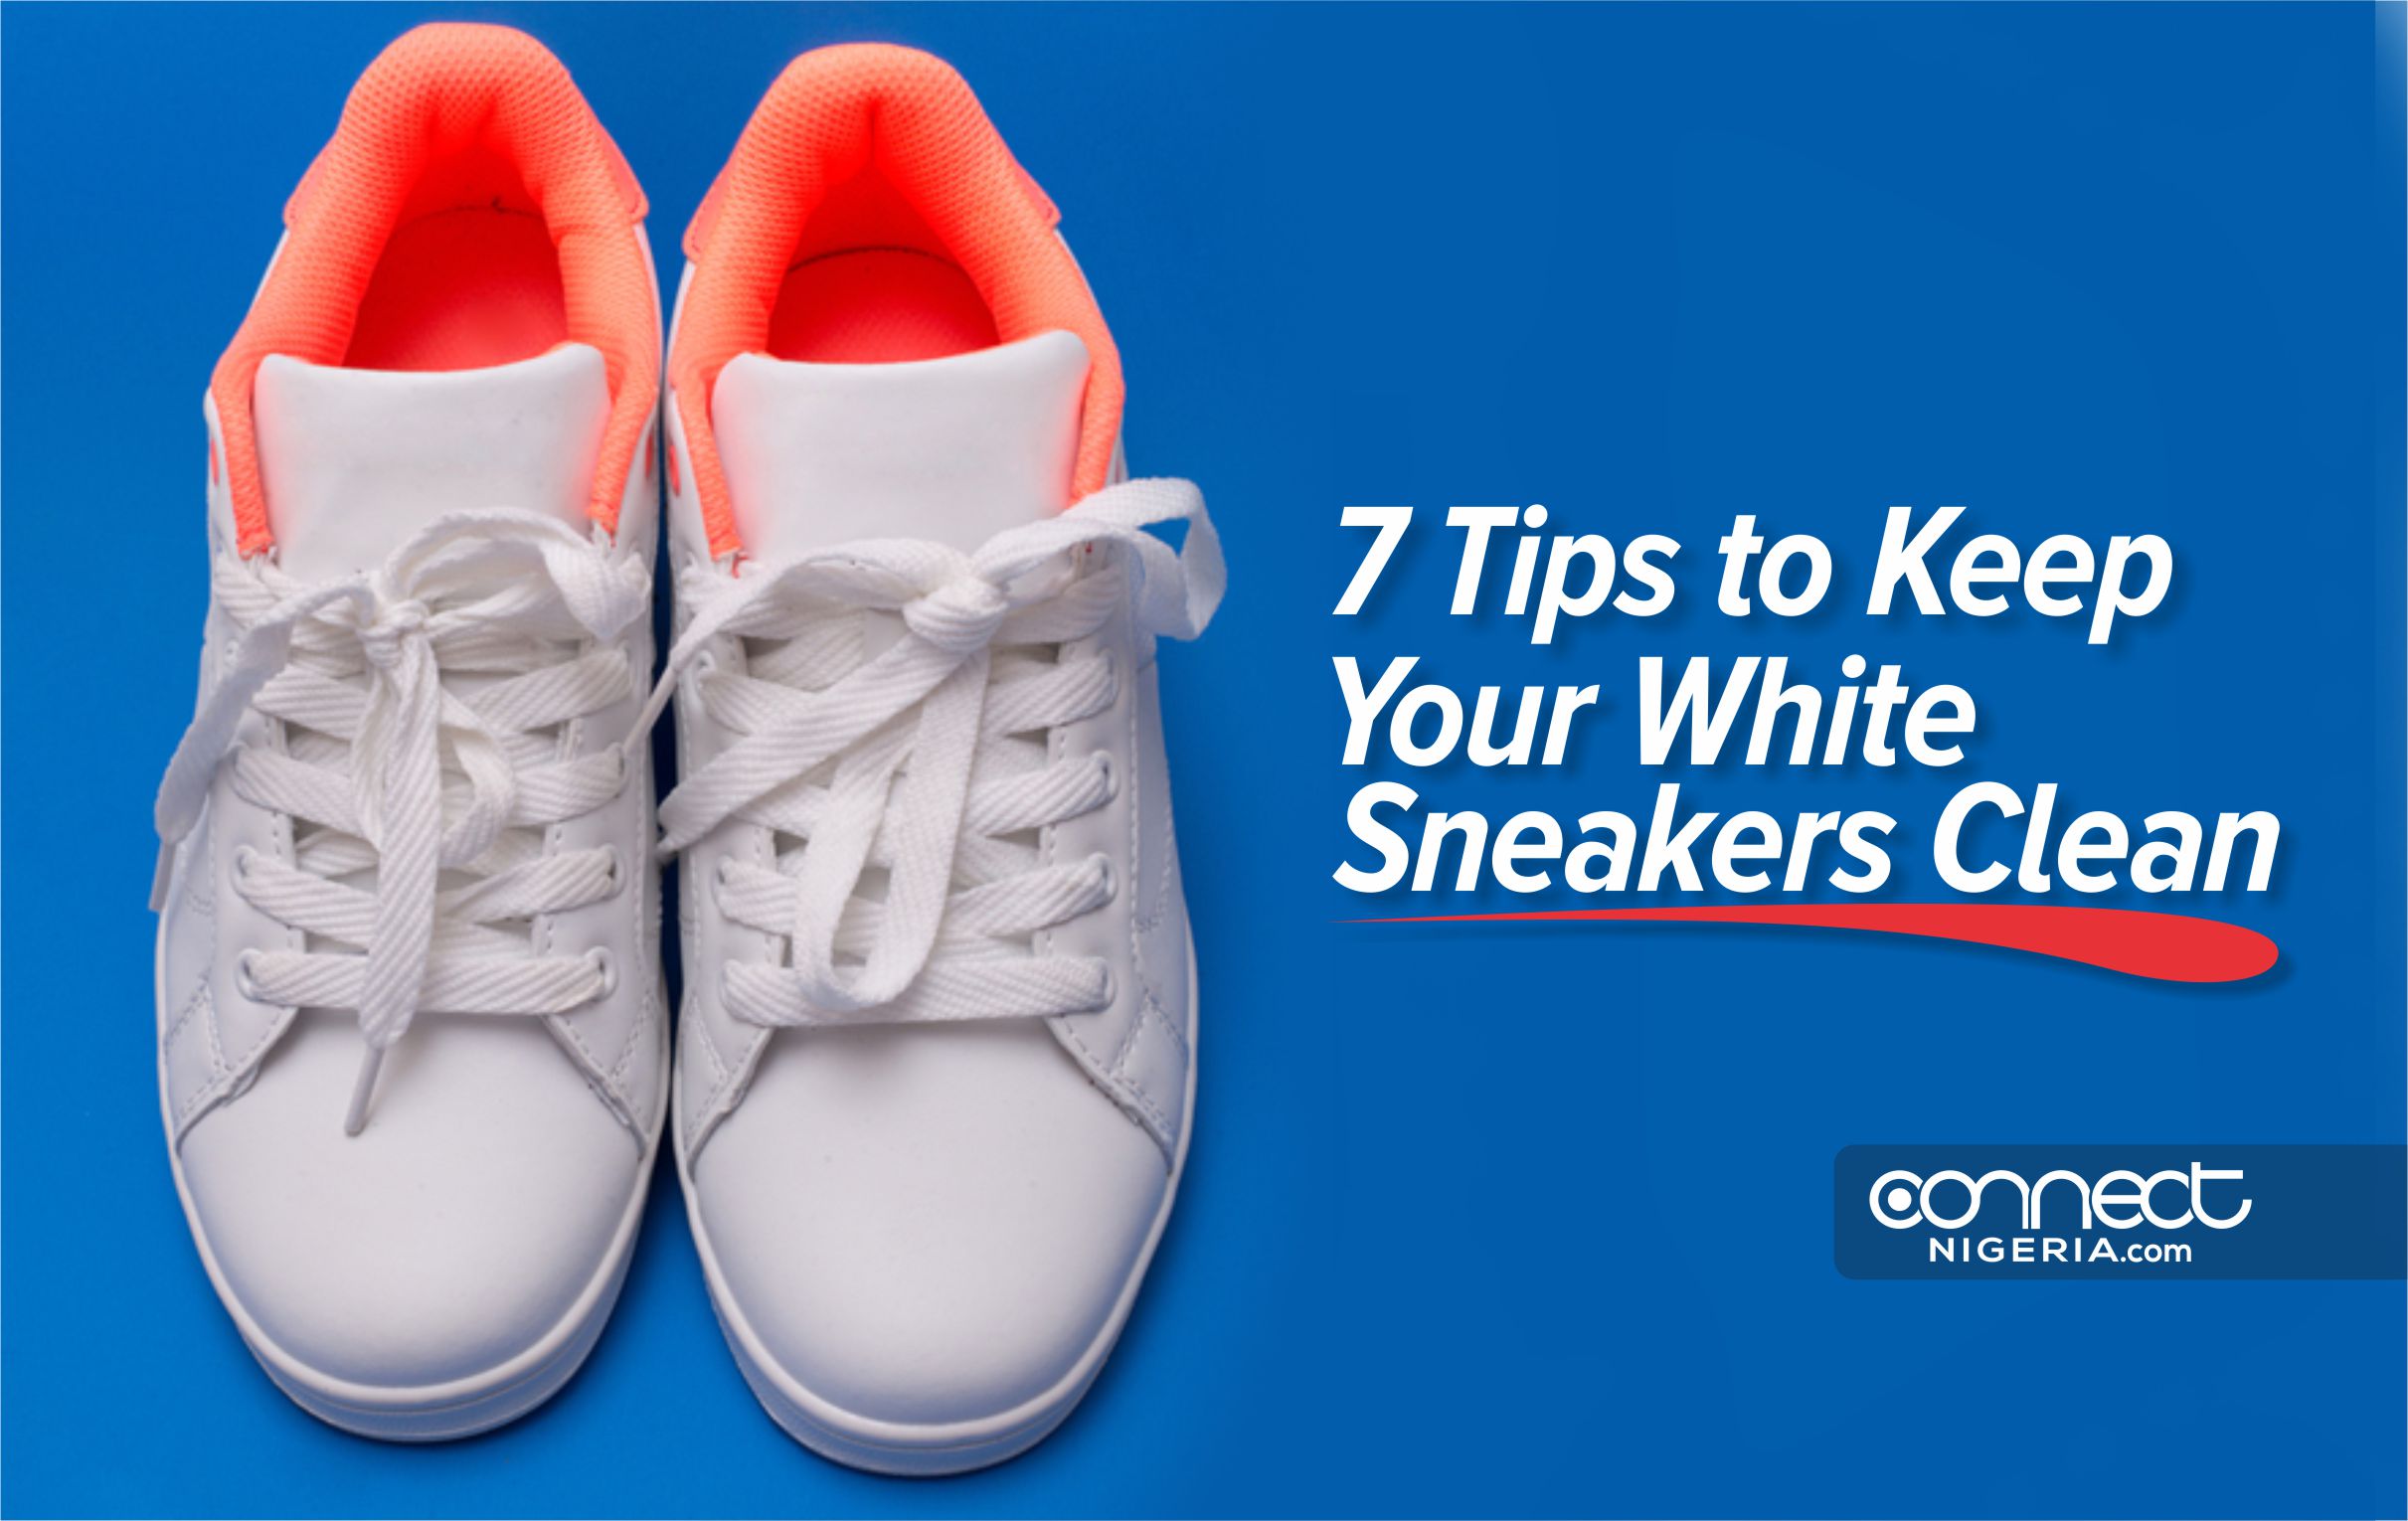 7 Tips to Keep Your White Sneakers Clean